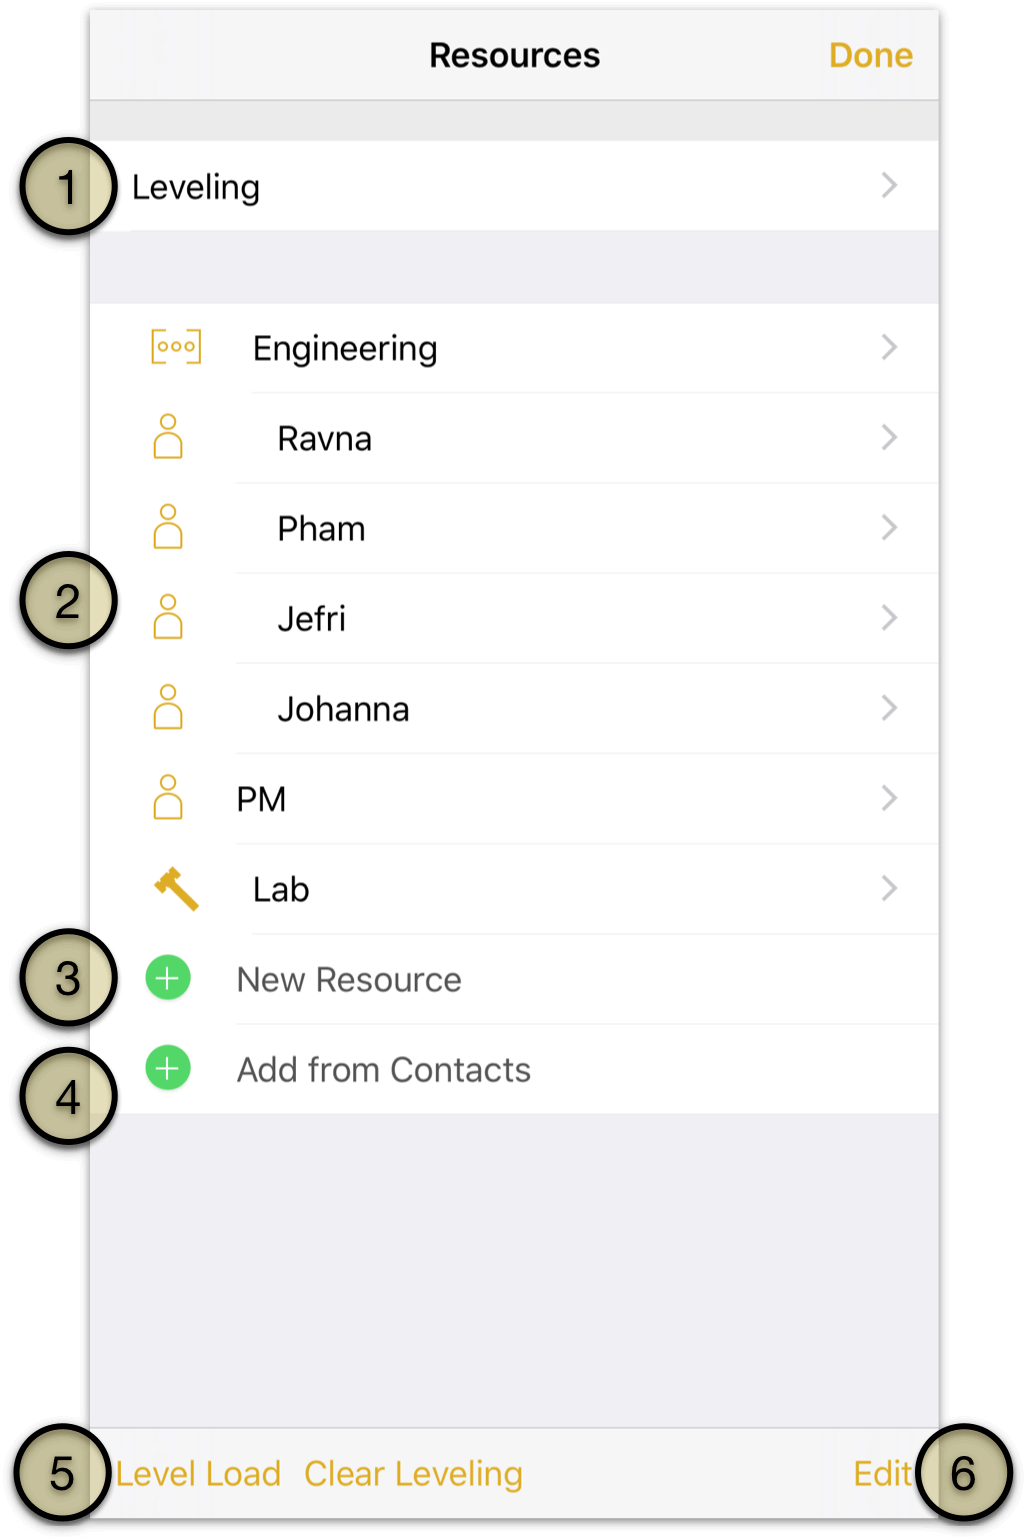 The resources inspector in OmniPlan 3 for iOS